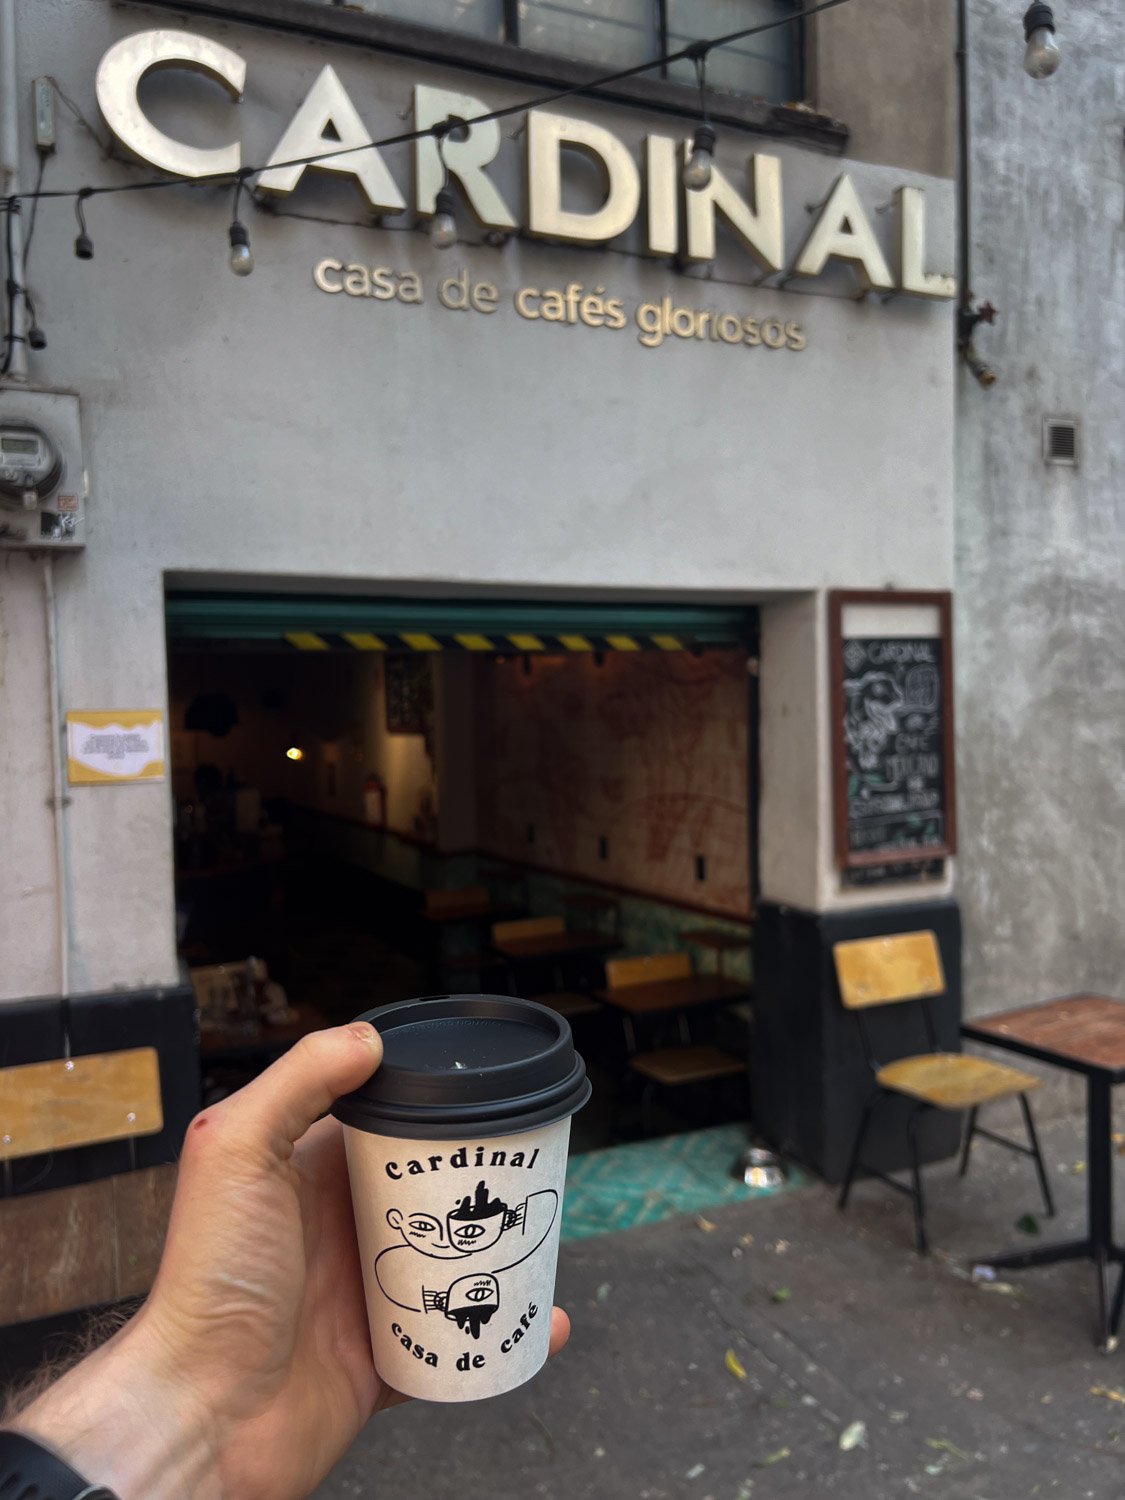 Cardinal Cafe - one of the best coffee shops in Mexico City.